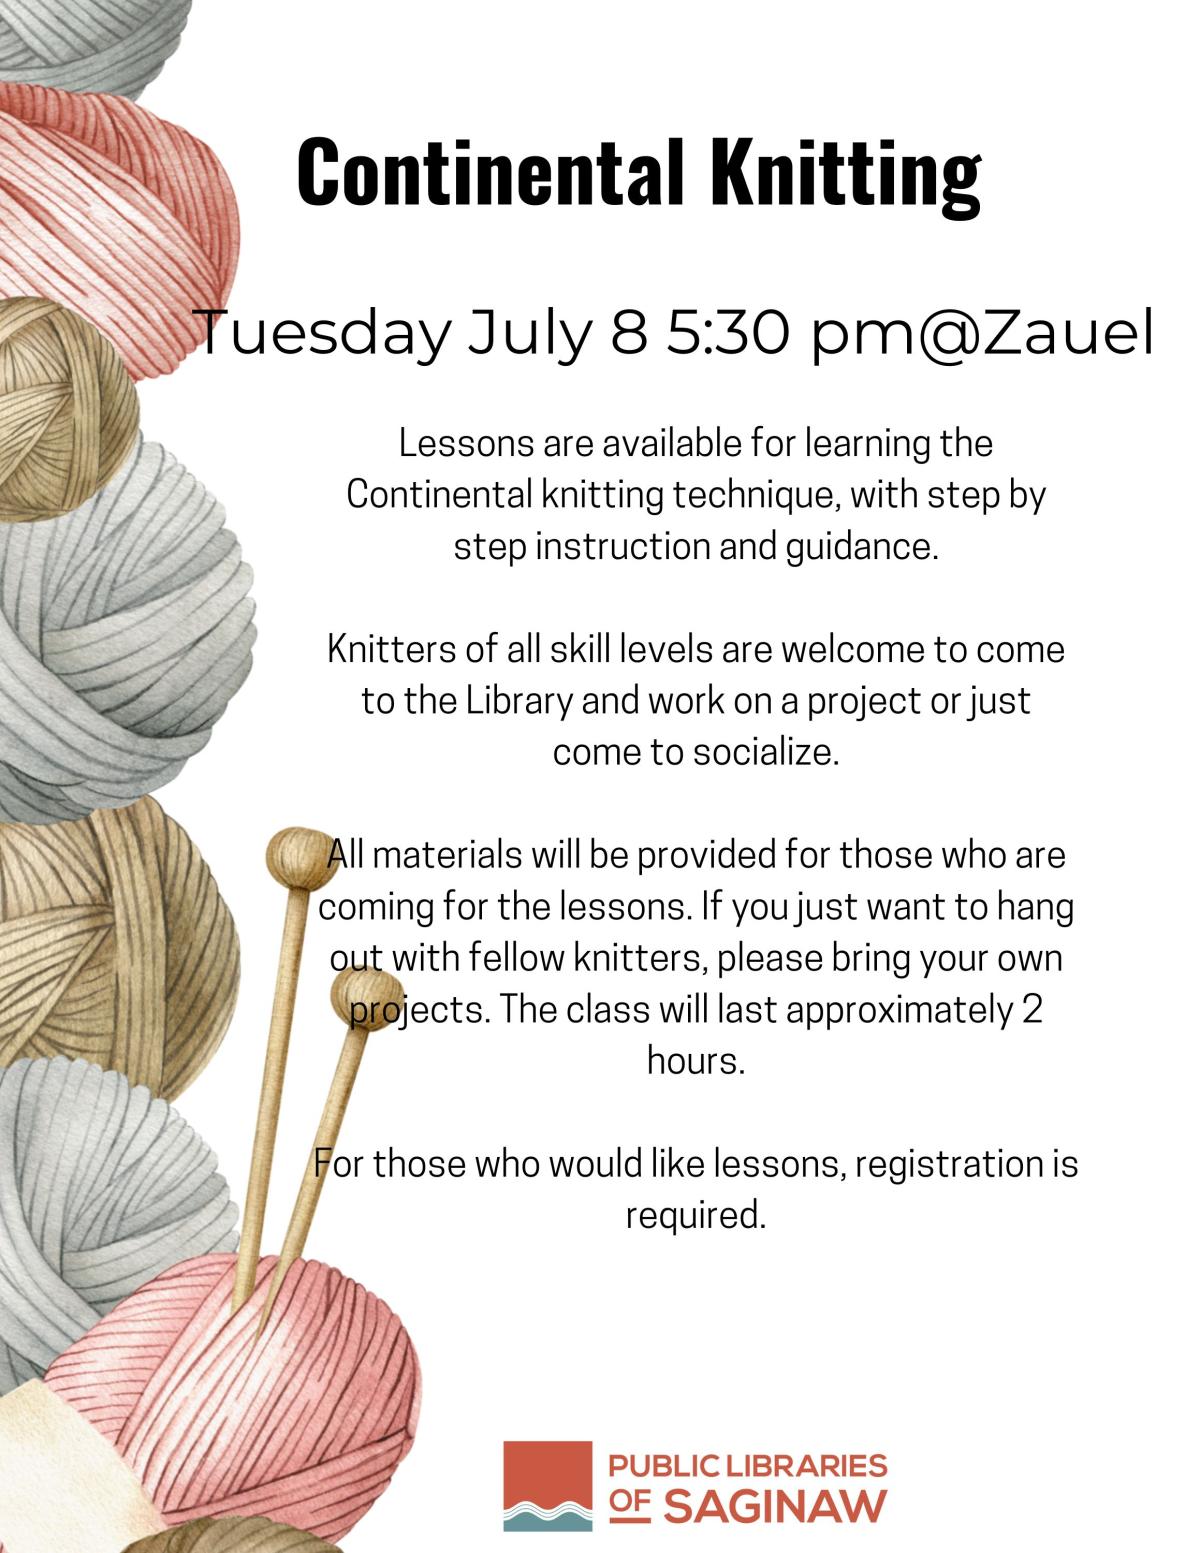 Continental Knitting flyer